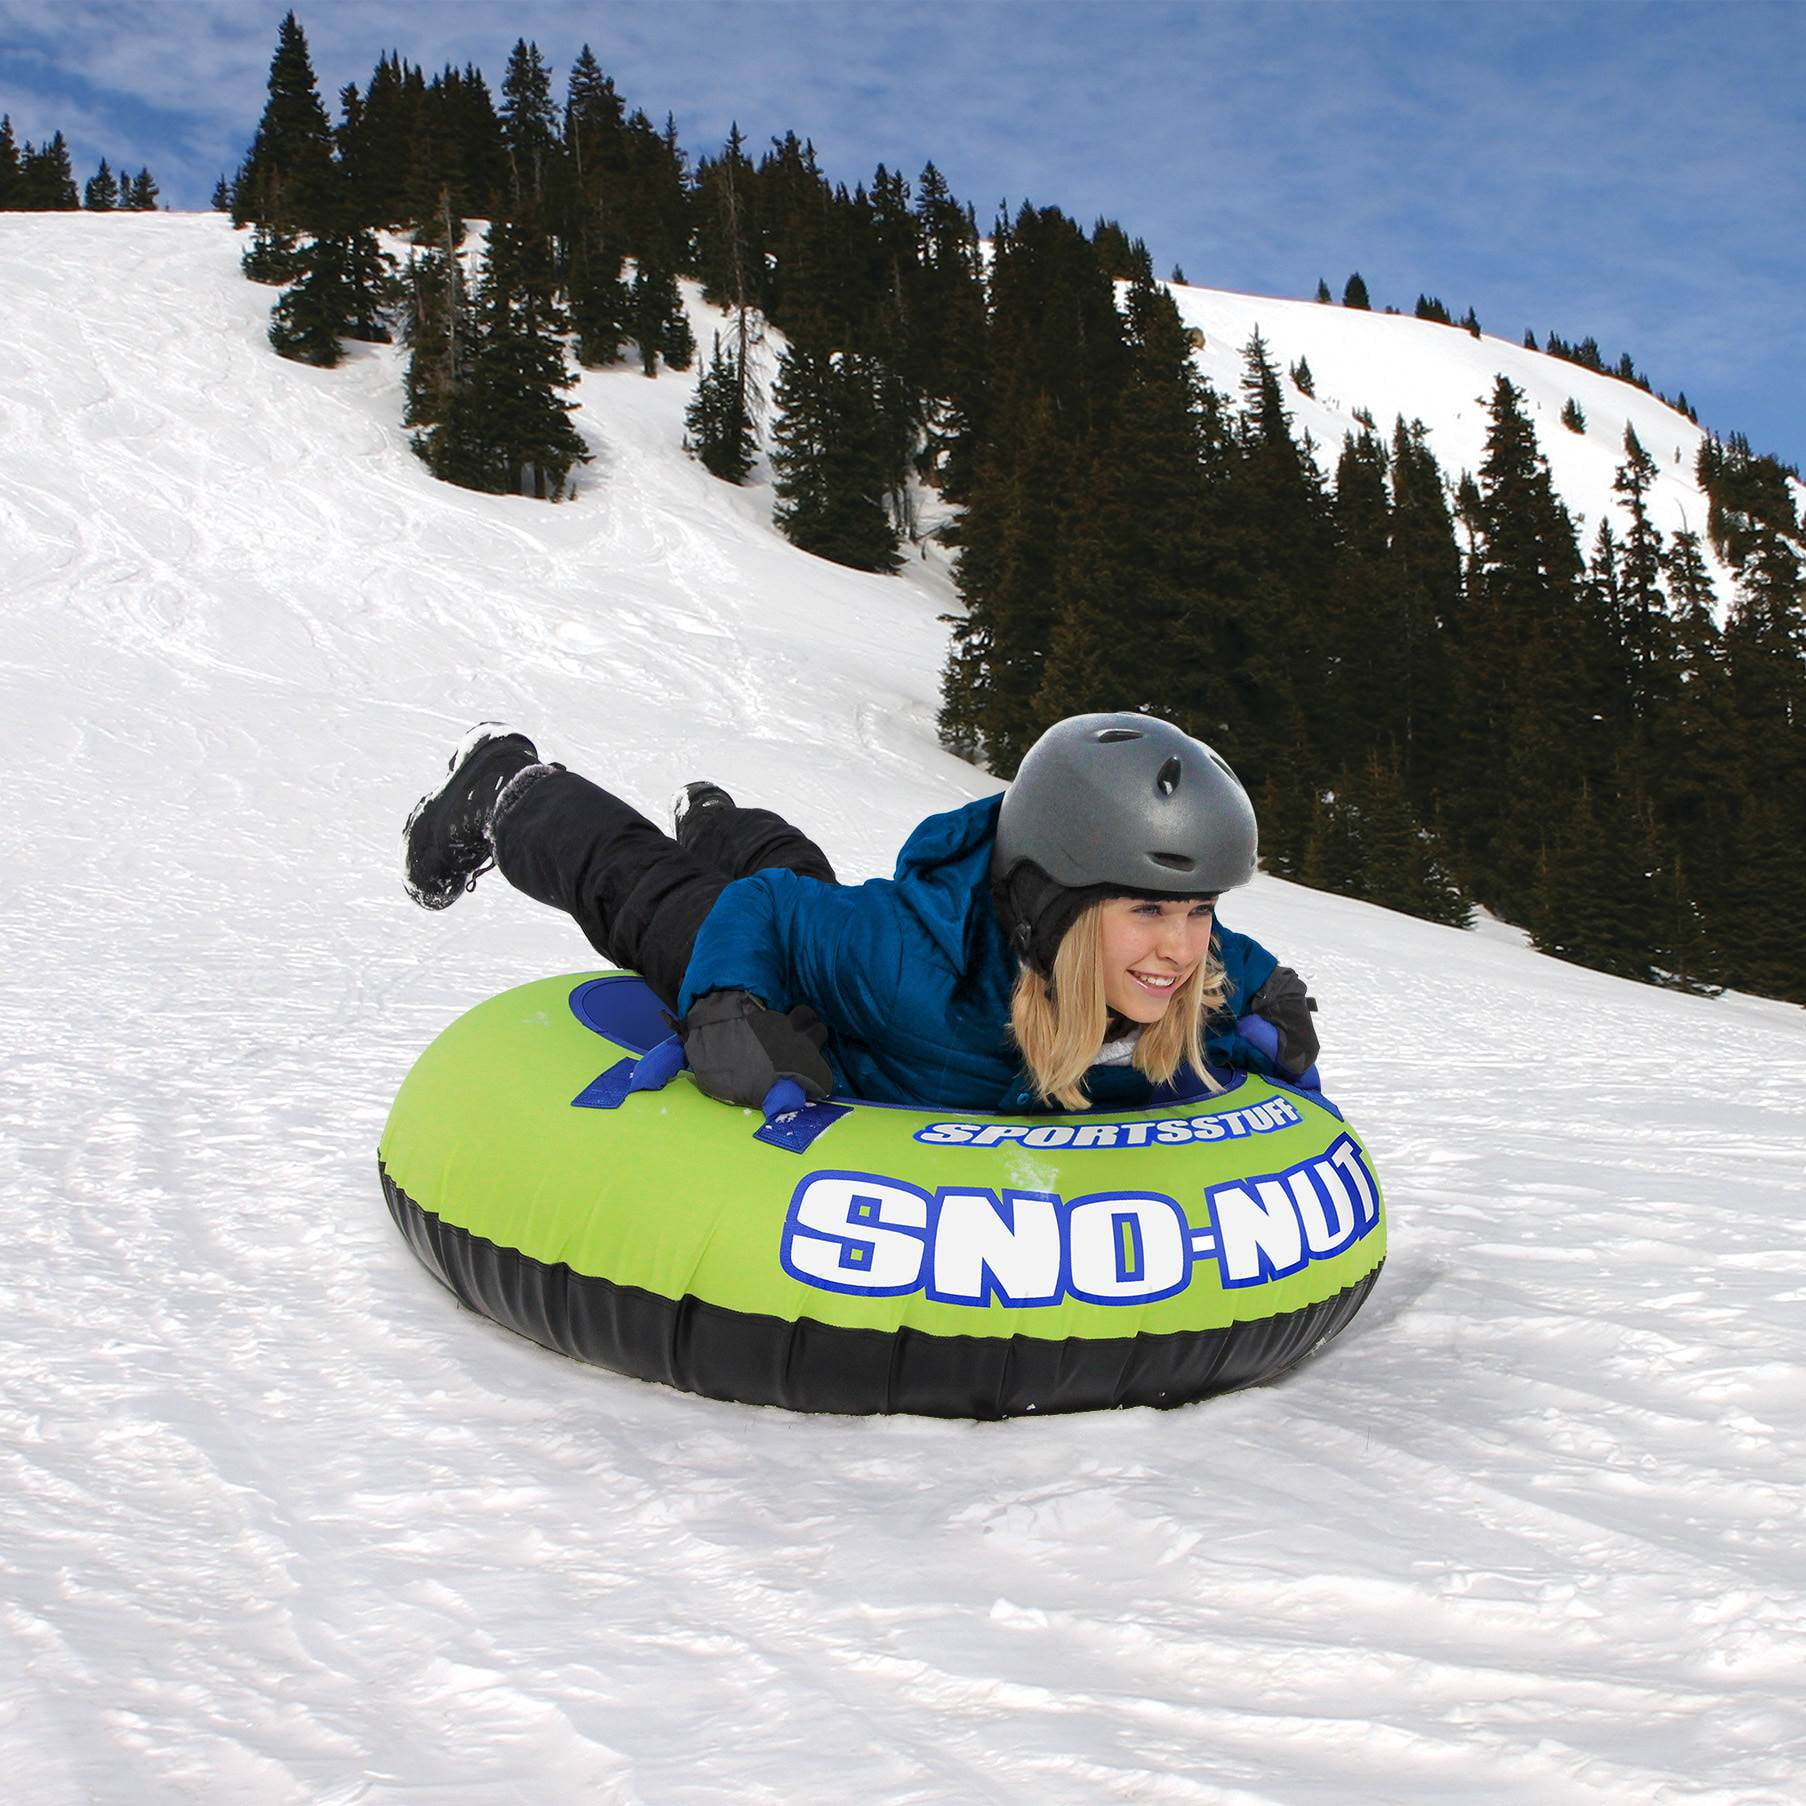 Sportsstuff Inflatable 48-Inch Sno-Nut Snow Tube with Foam Handles | 30-3201